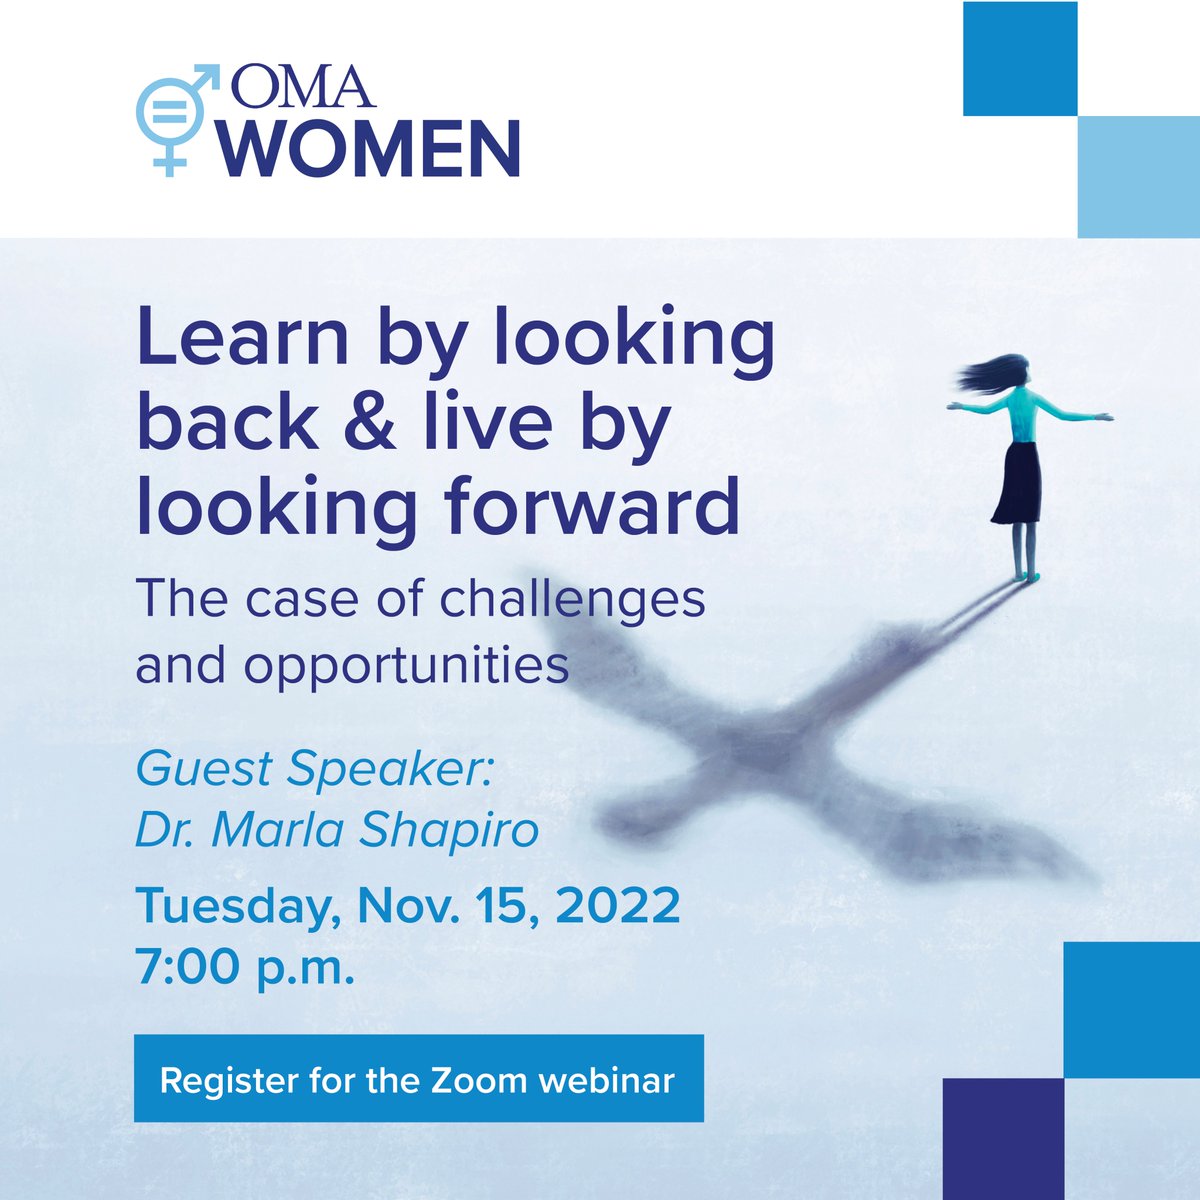 Less than one day left to register! Don't miss this unique opportunity to join OMA Women for the upcoming virtual event 'Learn by looking back & live by looking forward,' featuring guest speaker @DrMarla! Register here: ow.ly/2nUj50LowWw #Onhealth